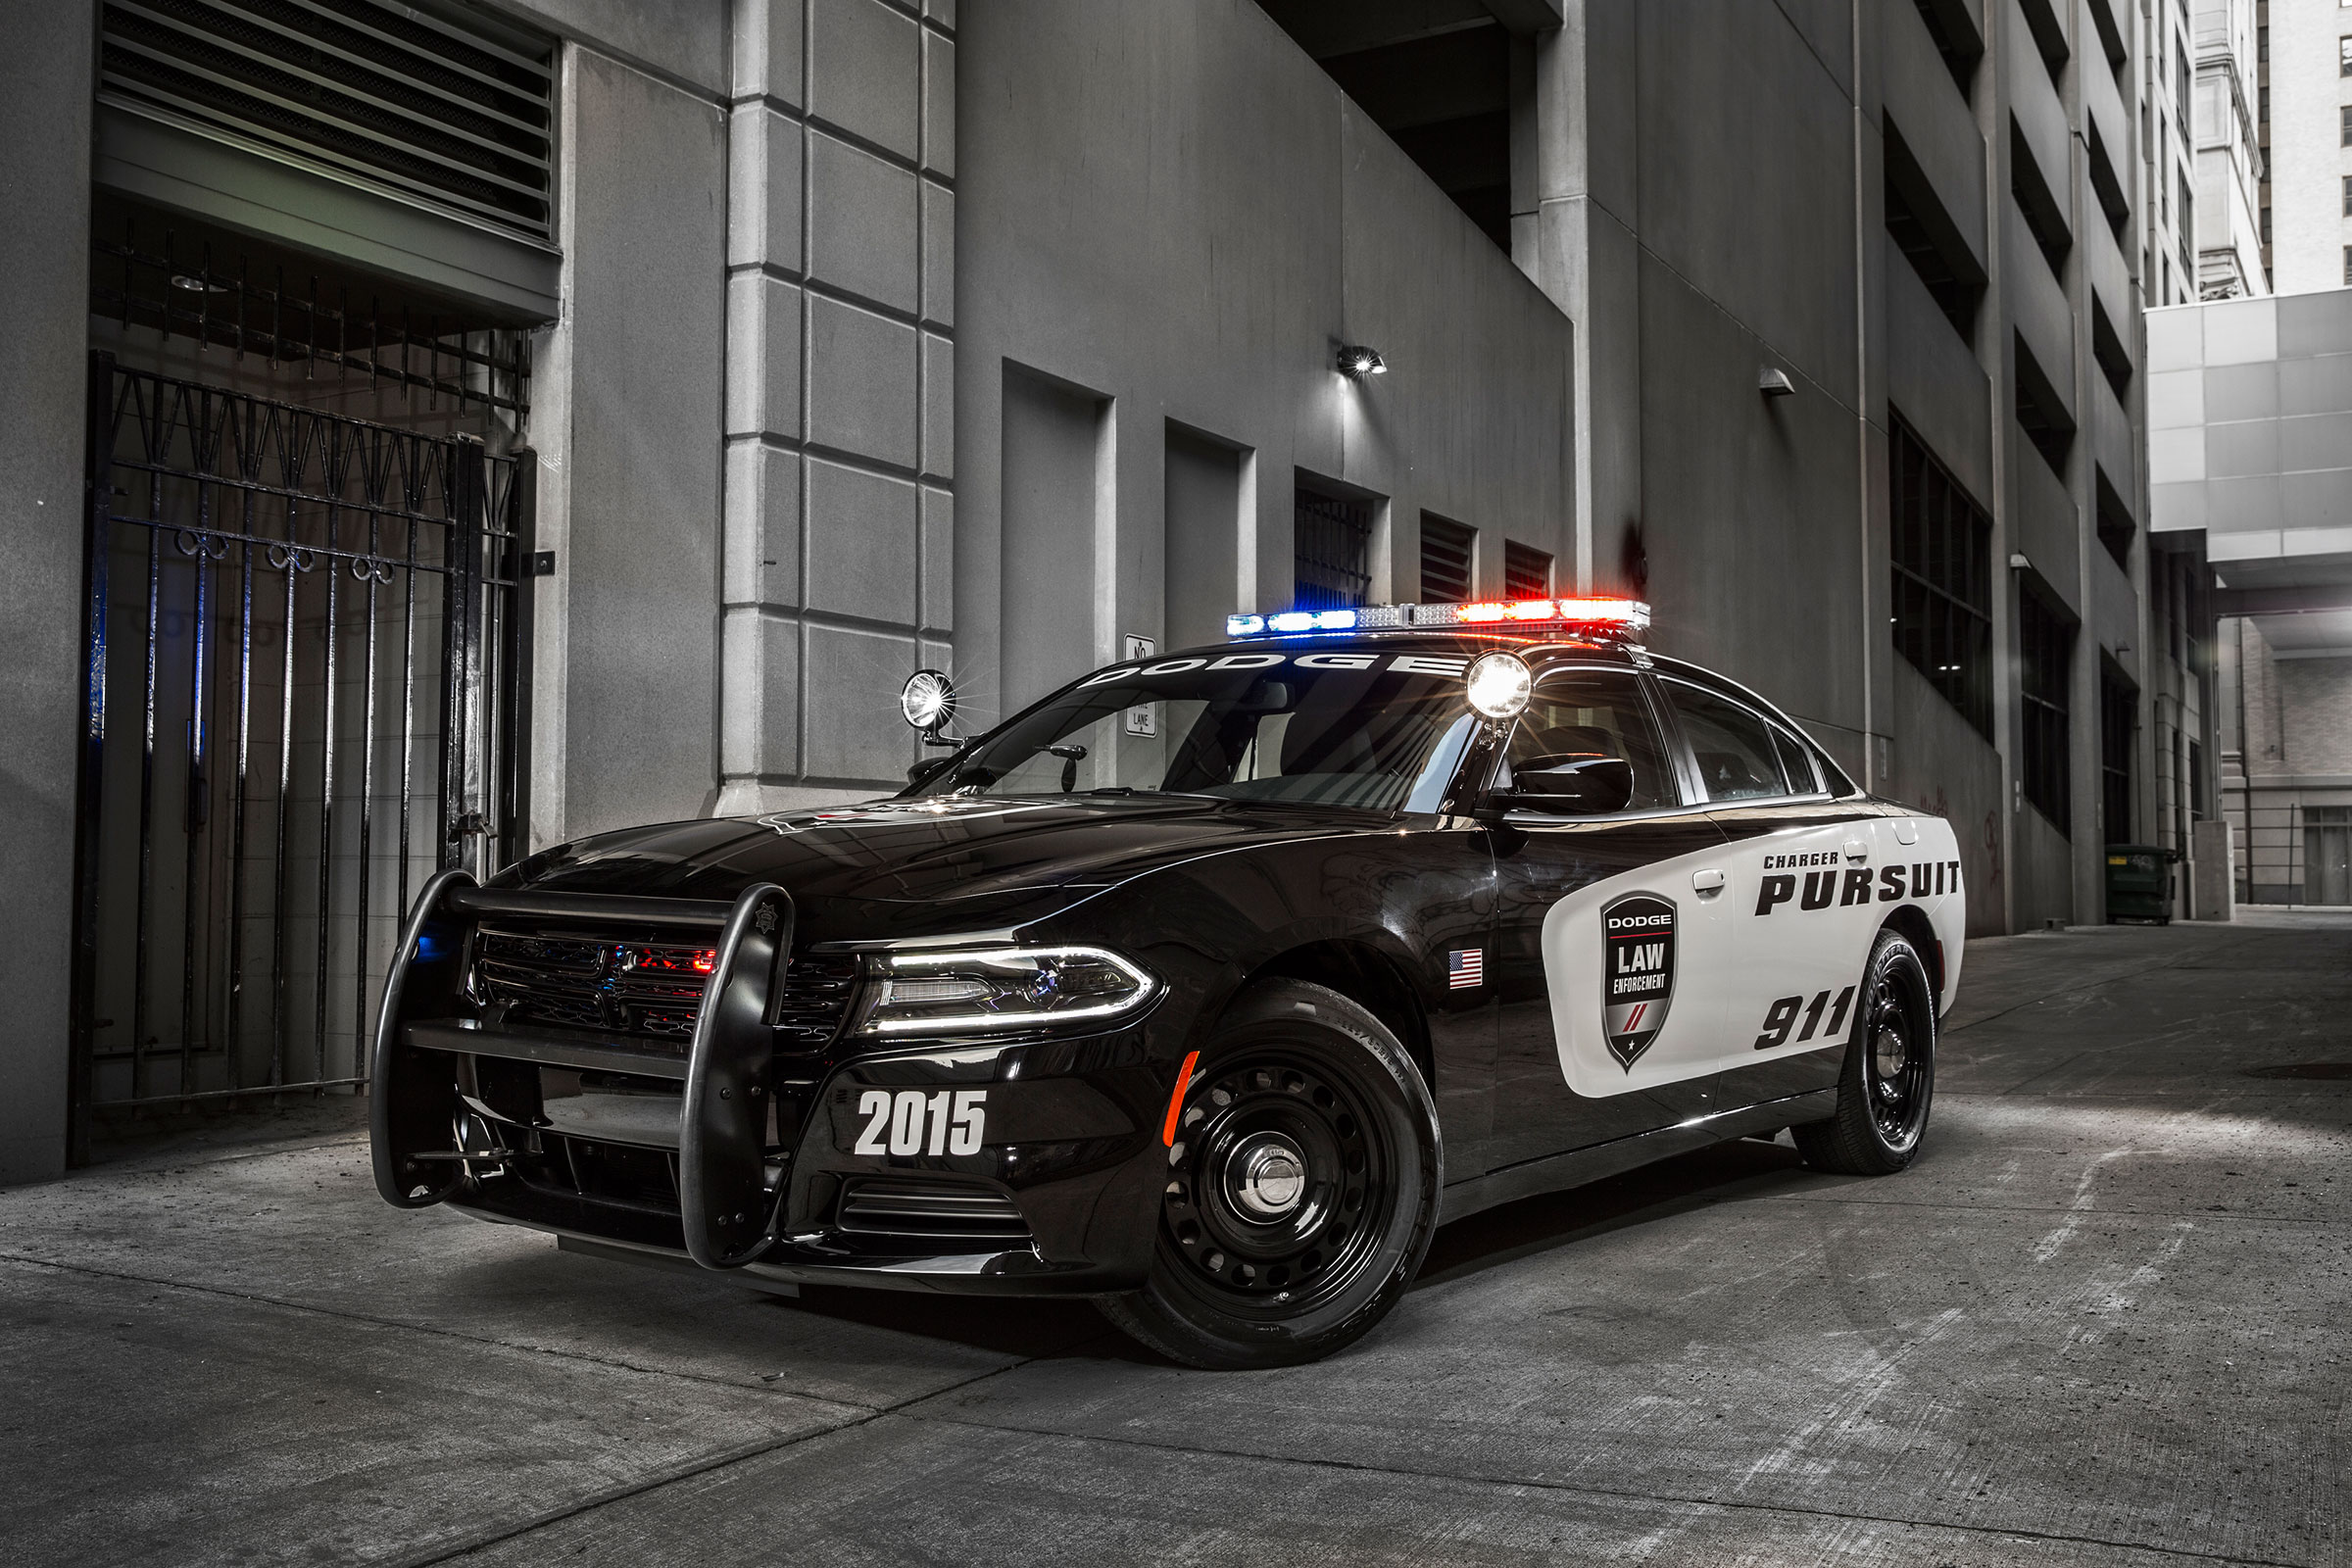 Be Afraid Dodge Charger Pursuit police car revealed Auto Express